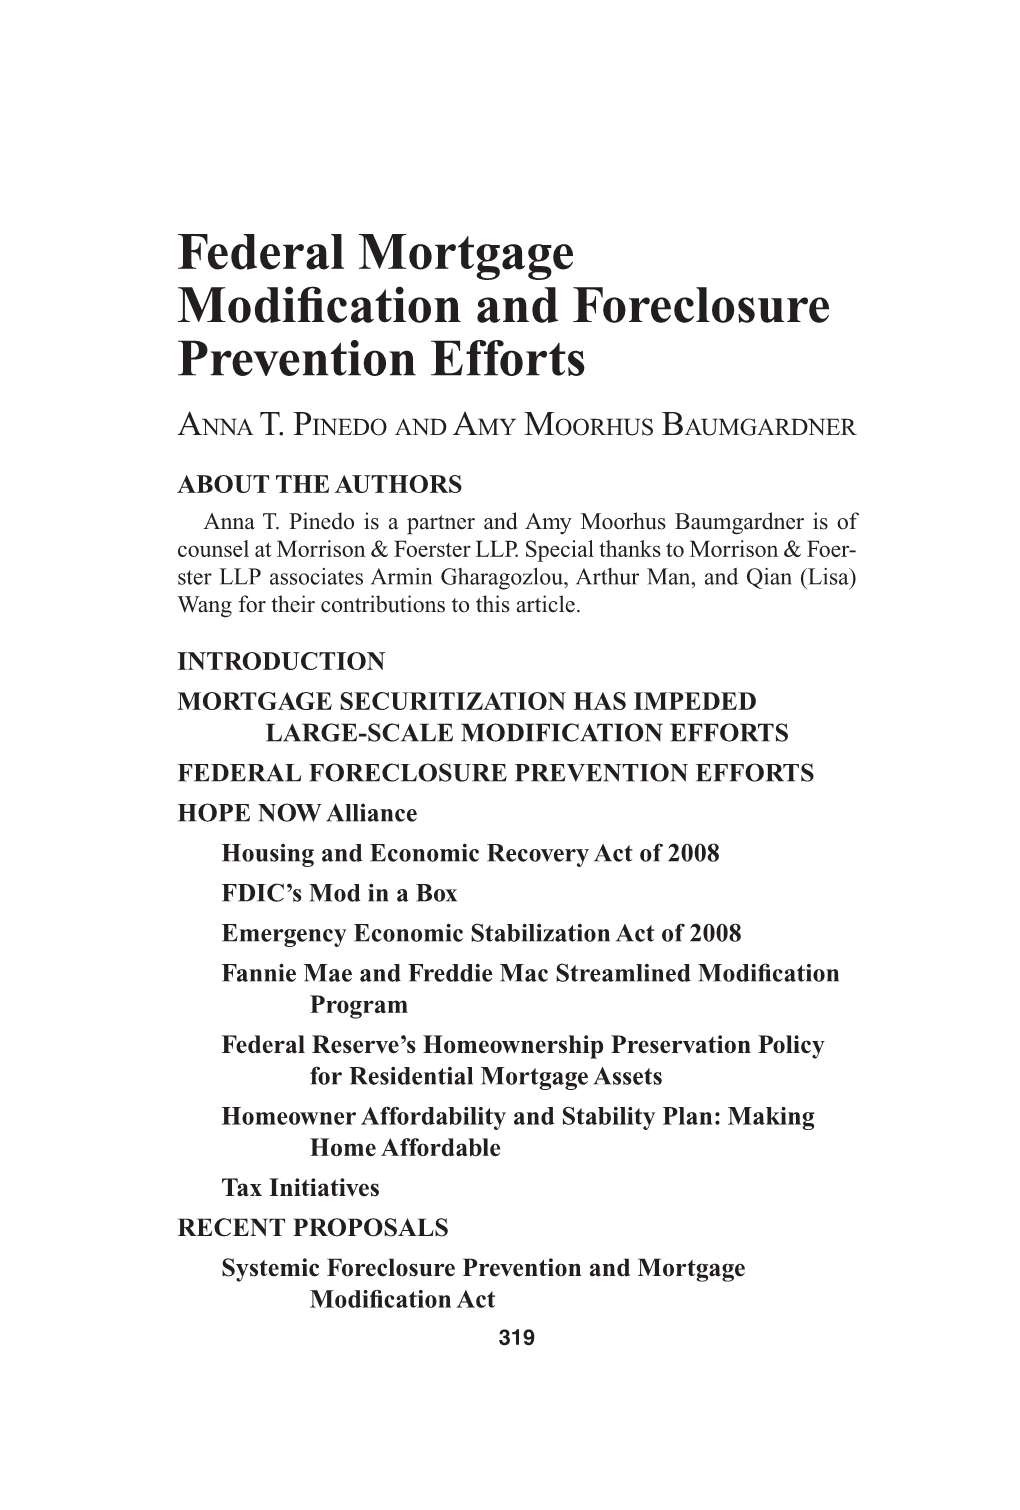 Federal Mortgage Modification and Foreclosure Prevention Efforts